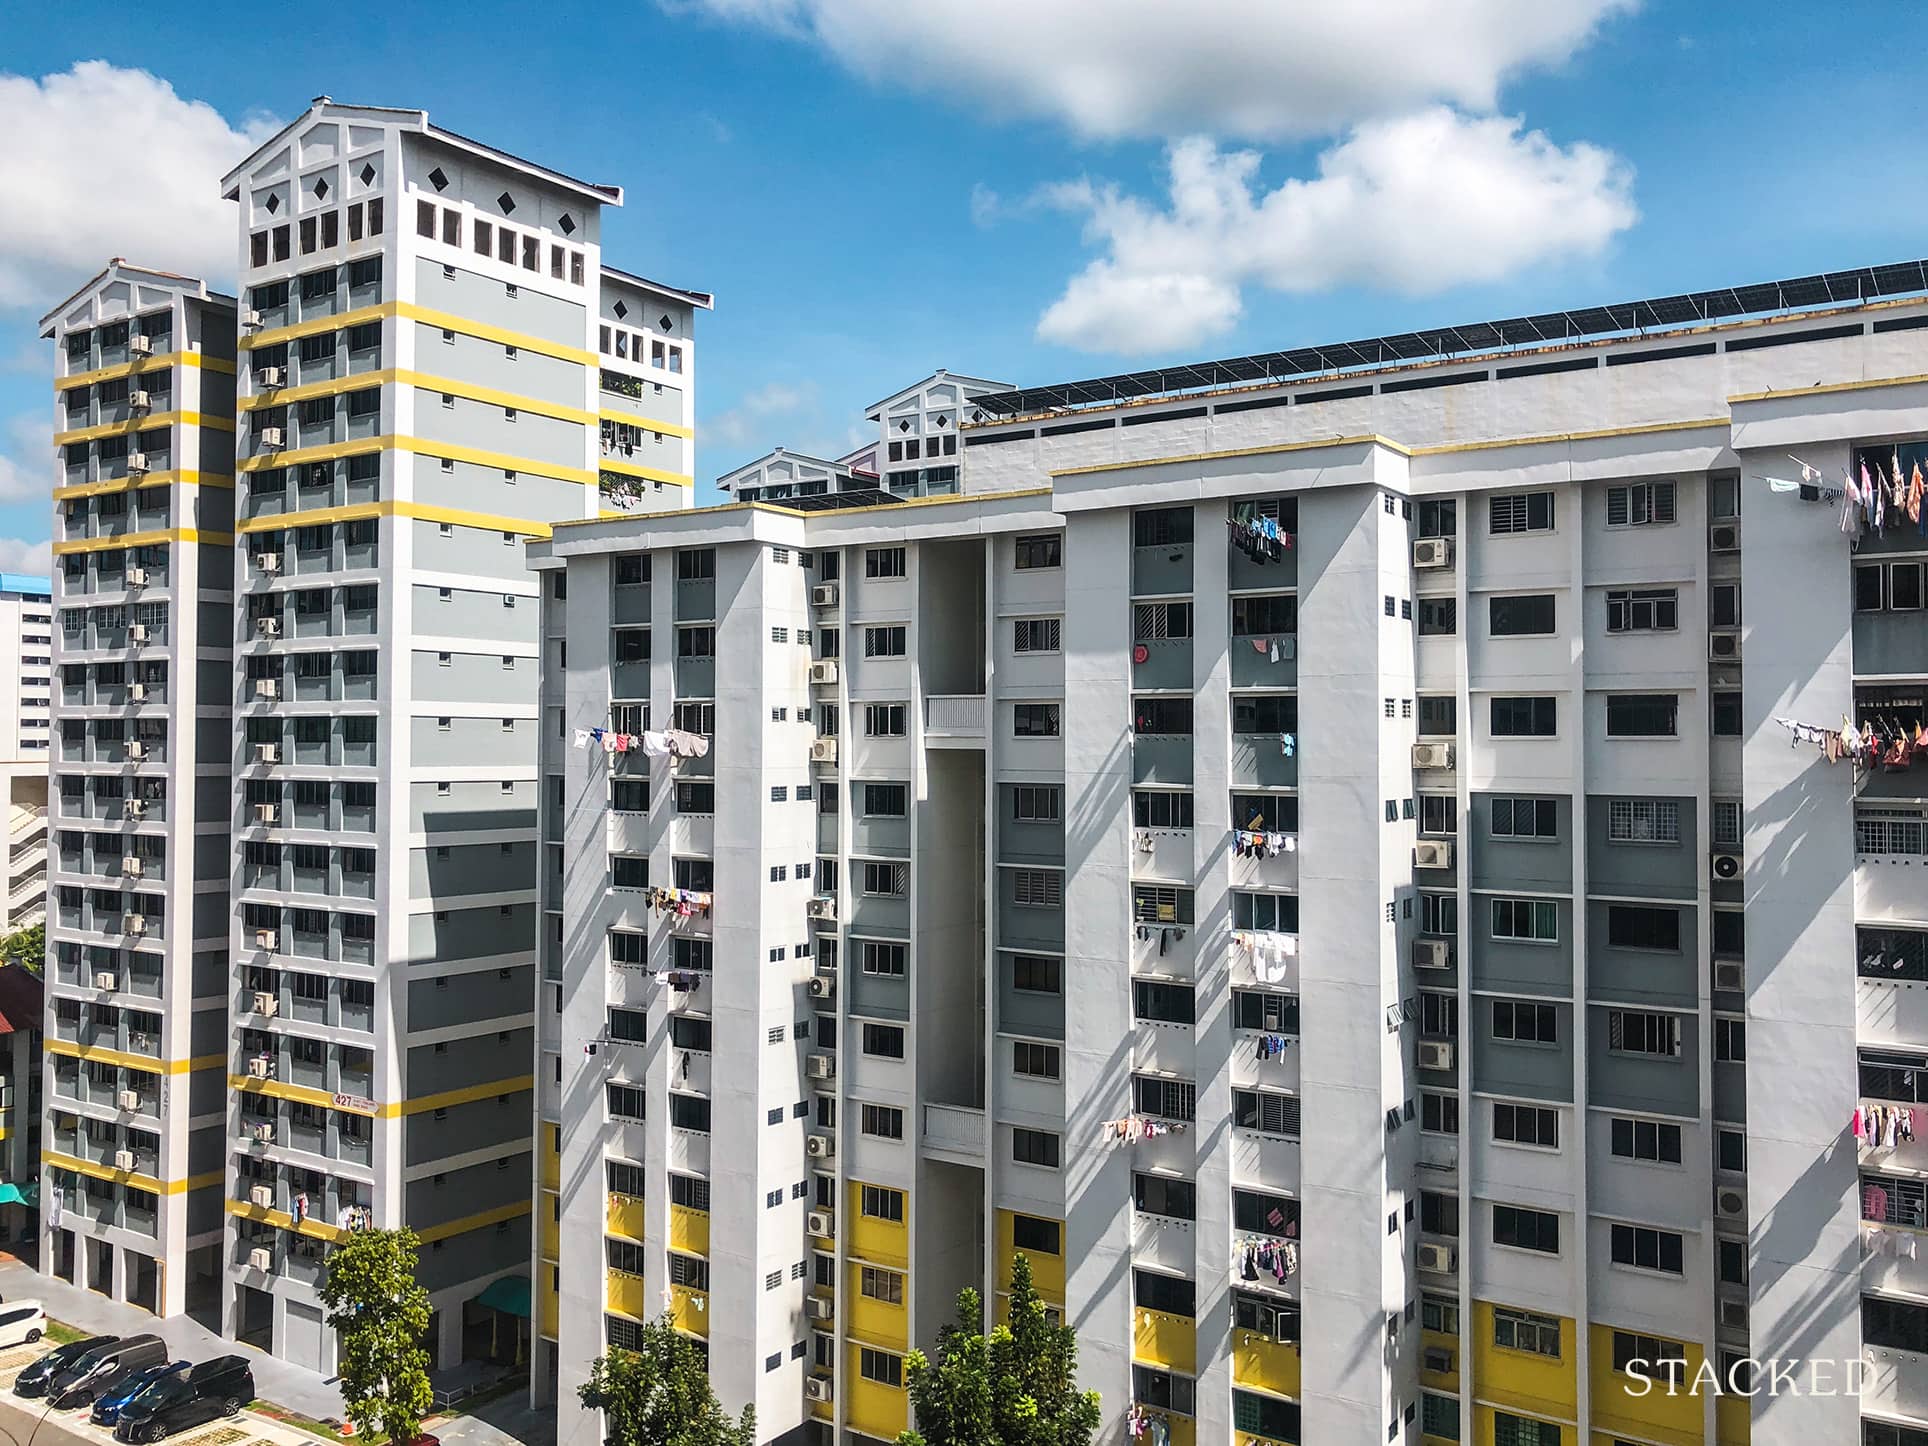 Sell Your HDB Today, Get $0: How Negative Cash Sales Can Still Be Found In Today's Property Market